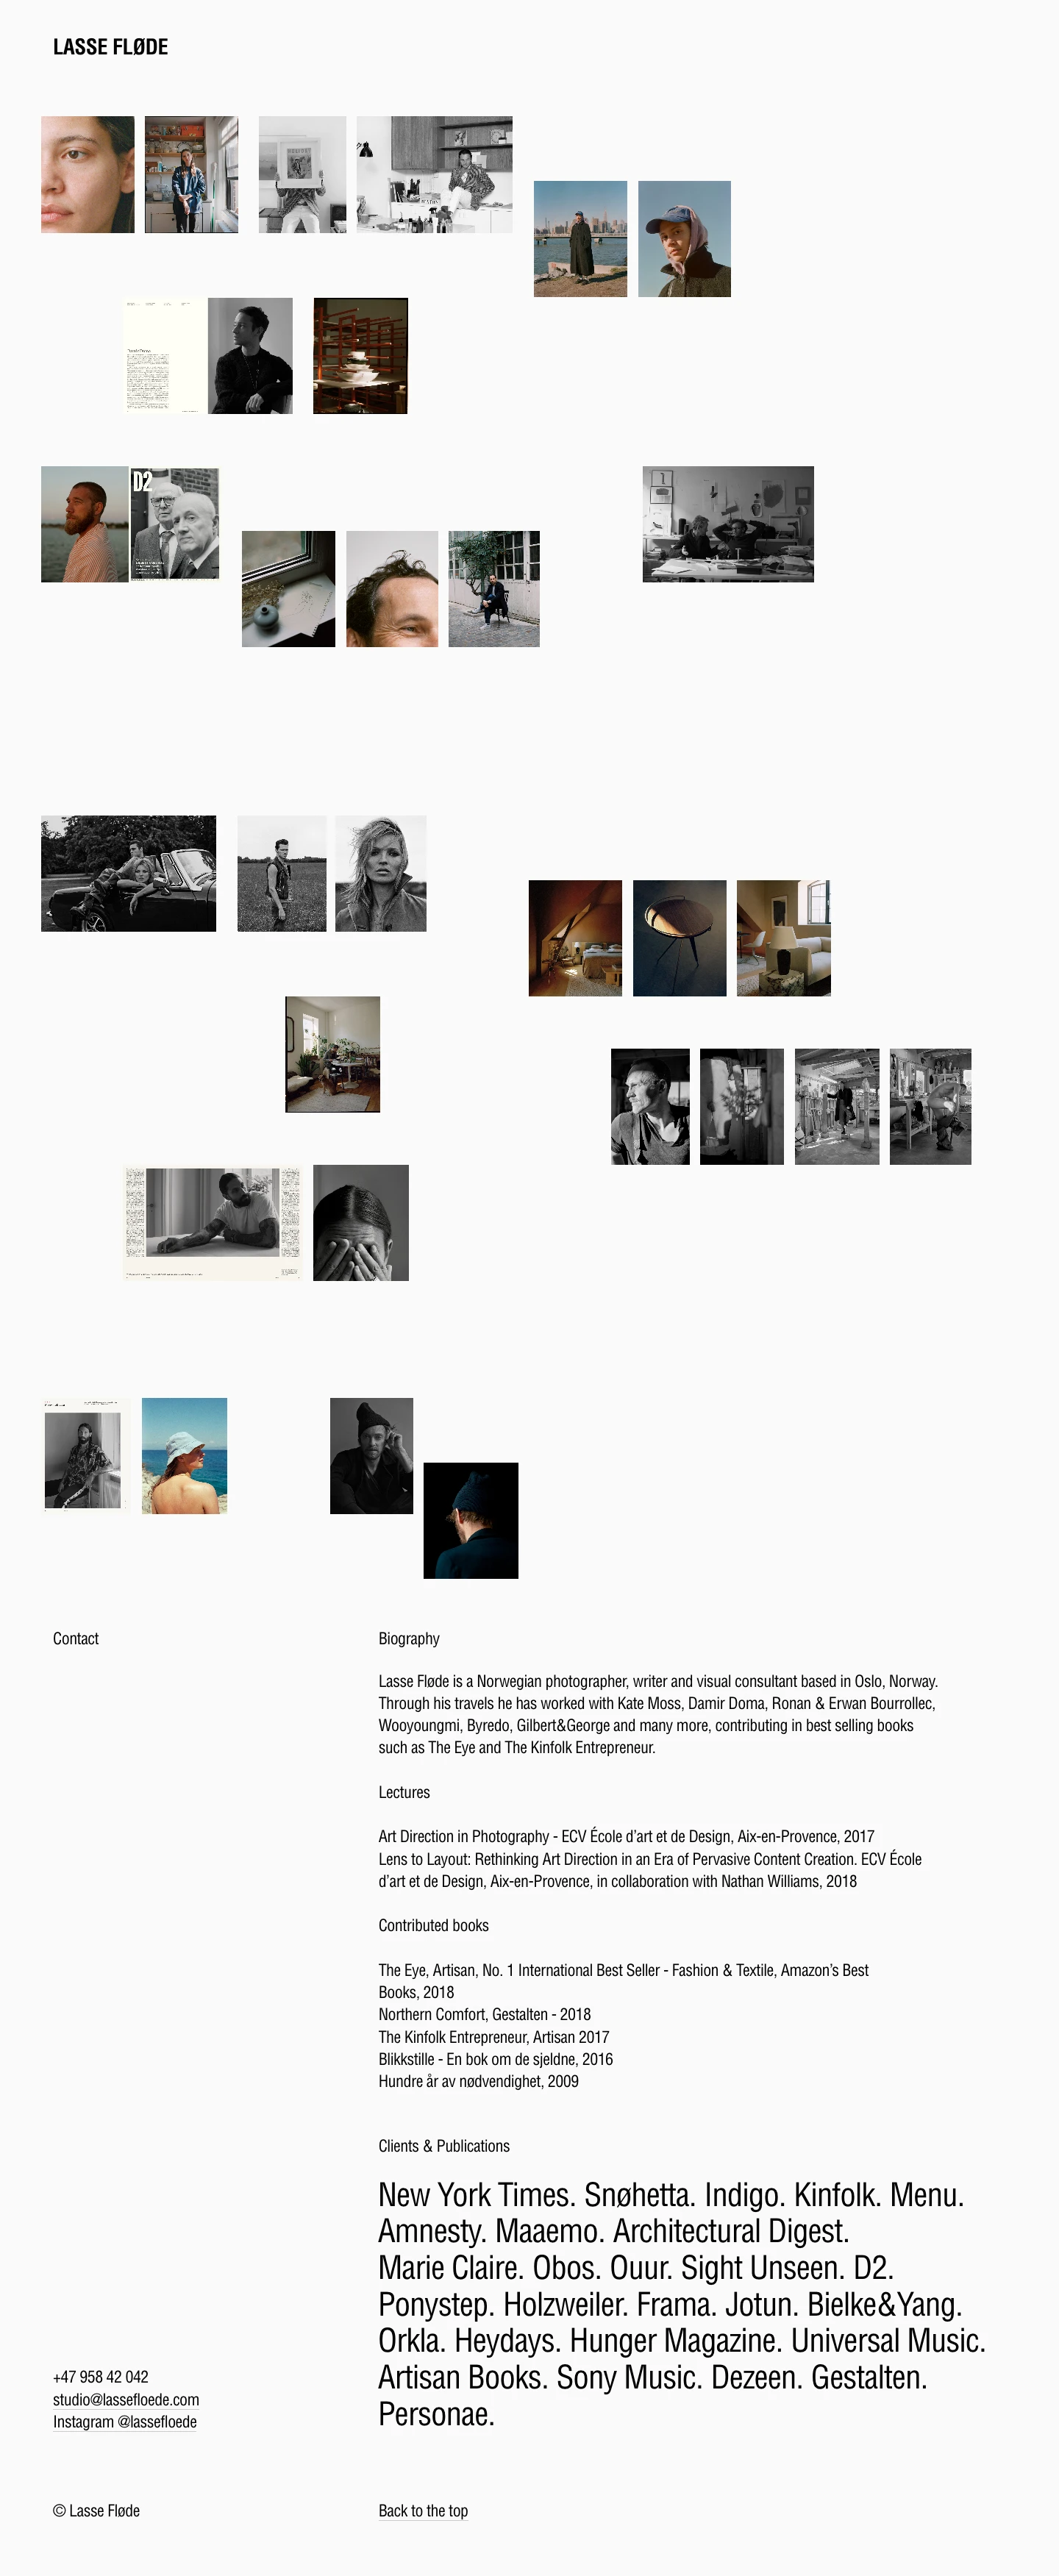 Lasse Fløde Landing Page Example: Lasse Fløde is a Norwegian photographer, writer and visual consultant based in Oslo, Norway. Through his travels he has worked with Kate Moss, Damir Doma, Ronan & Erwan Bourrollec, Wooyoungmi, Byredo, Gilbert&George and many more, contributing in best selling books such as The Eye and The Kinfolk Entrepreneur.